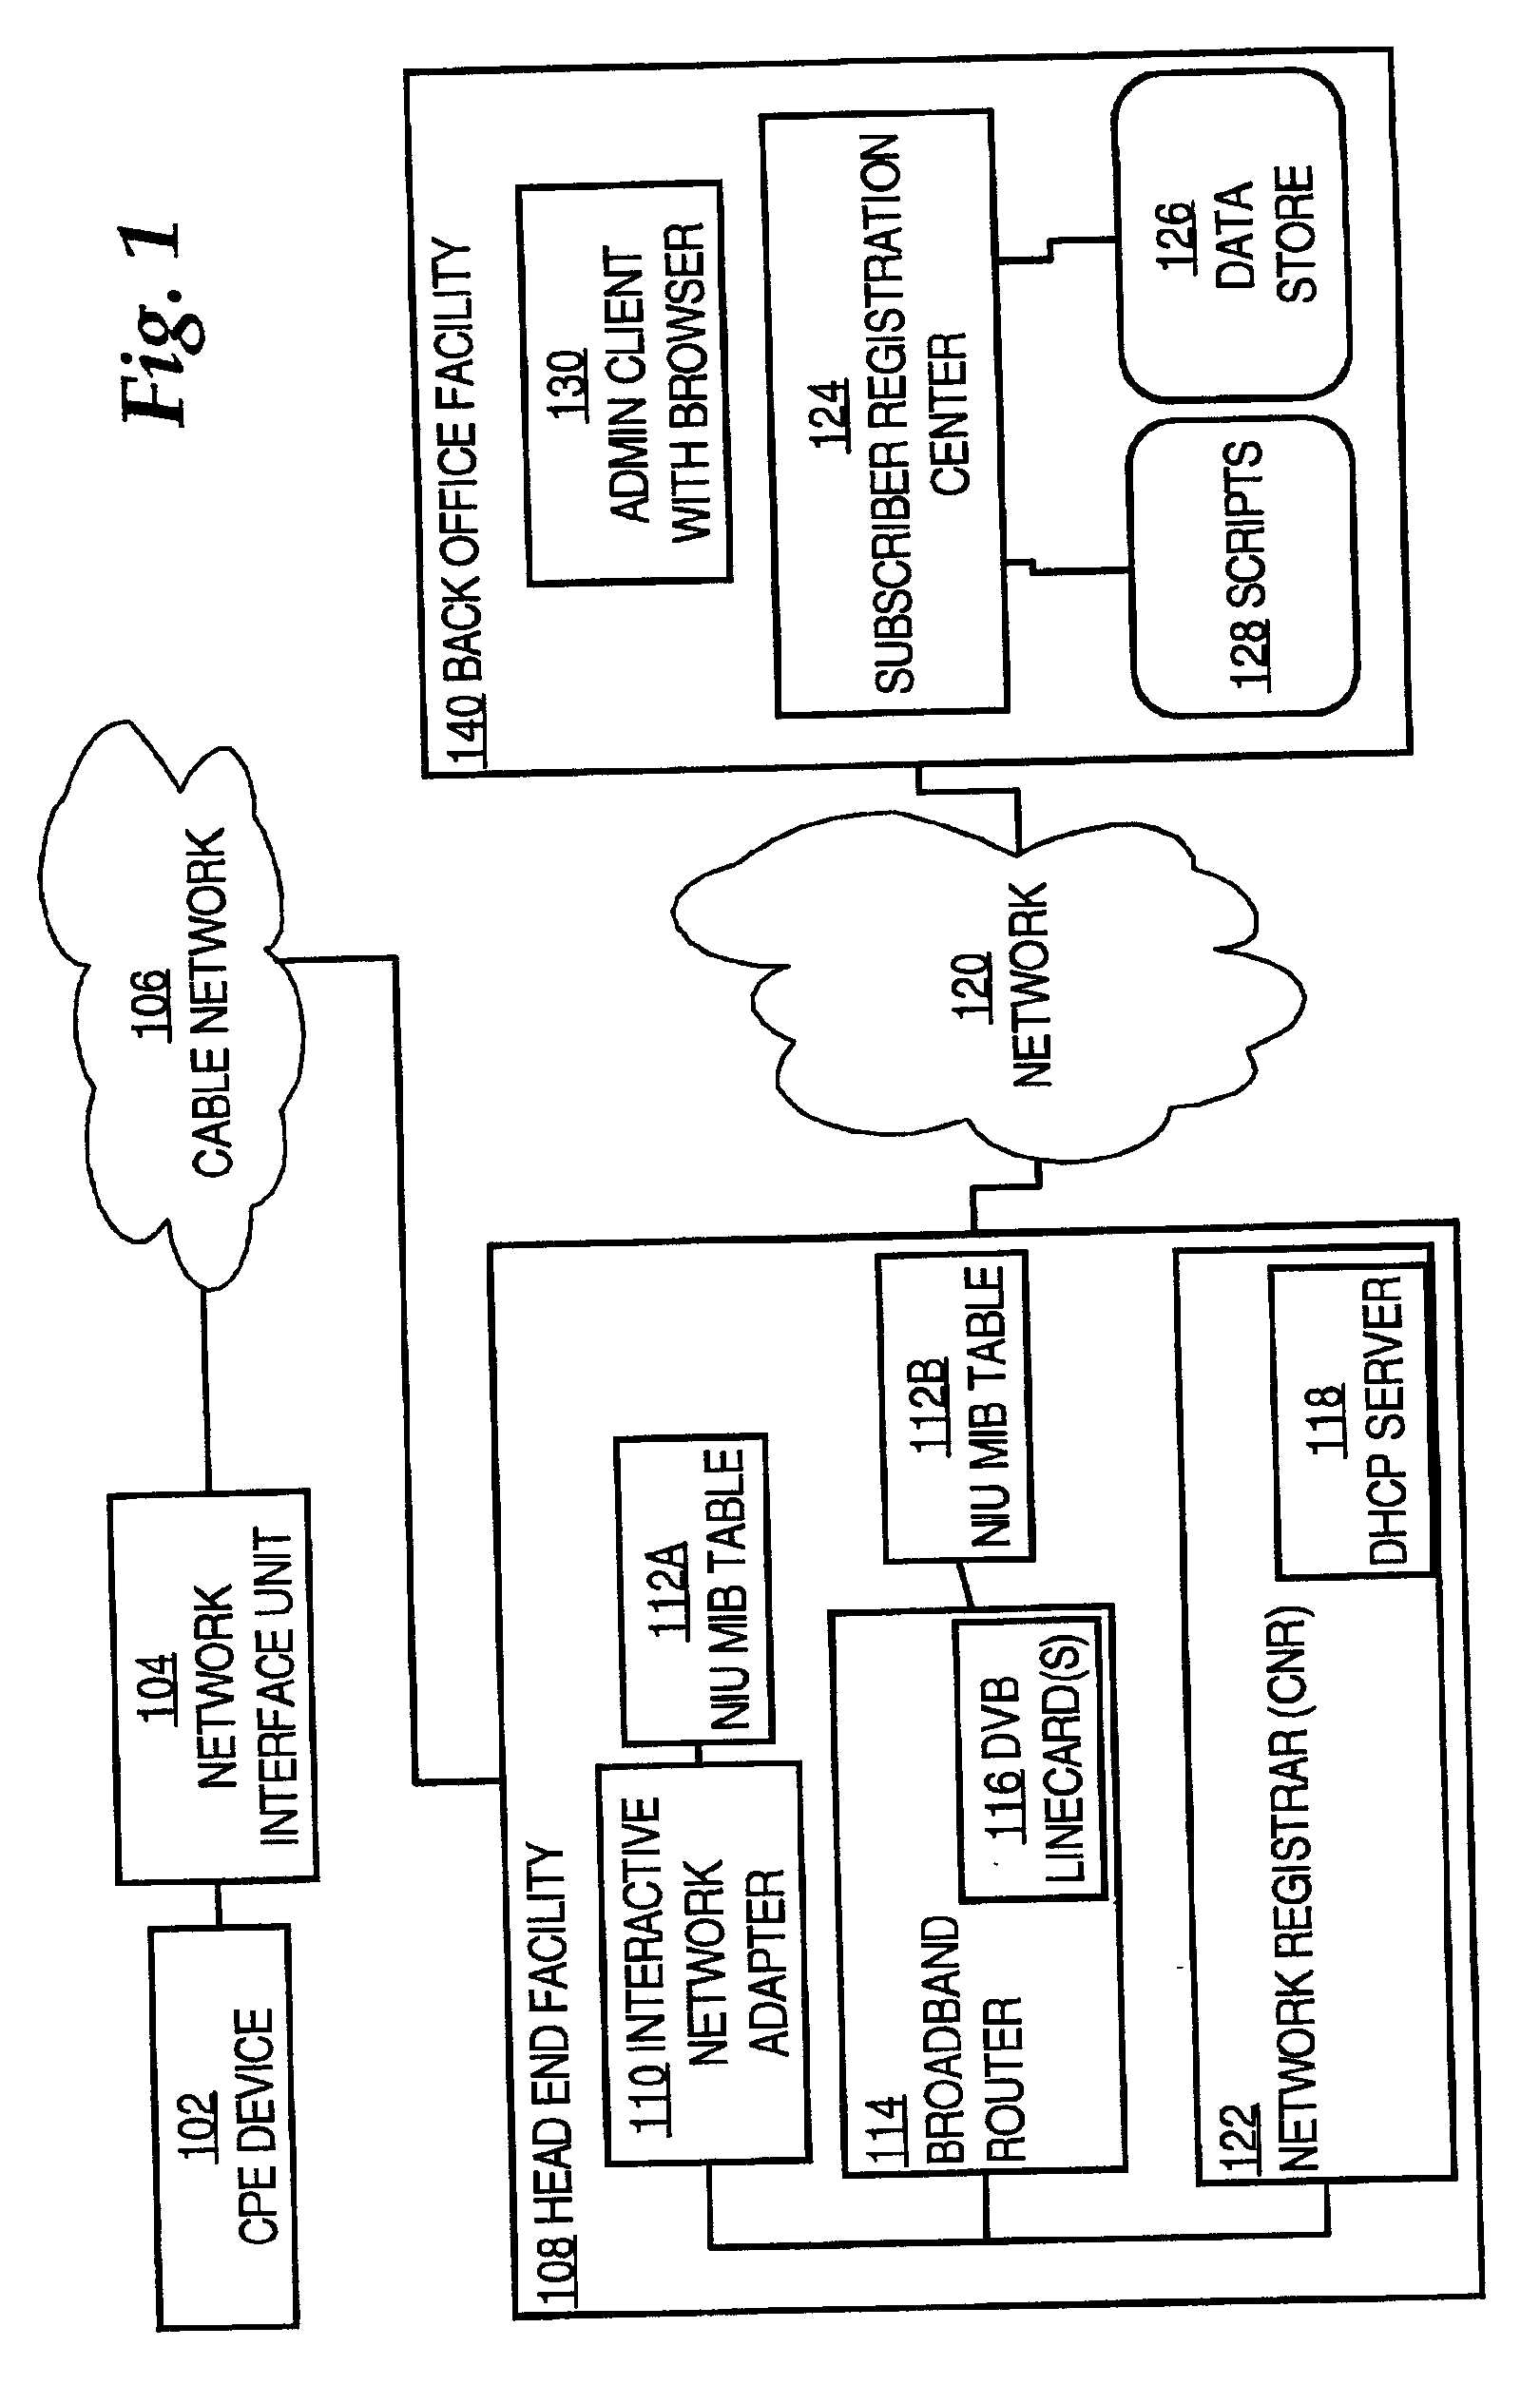 Method and apparatus for establishing class of service configuration in a network device of a broadband cable network using dynamic host configuration protocol